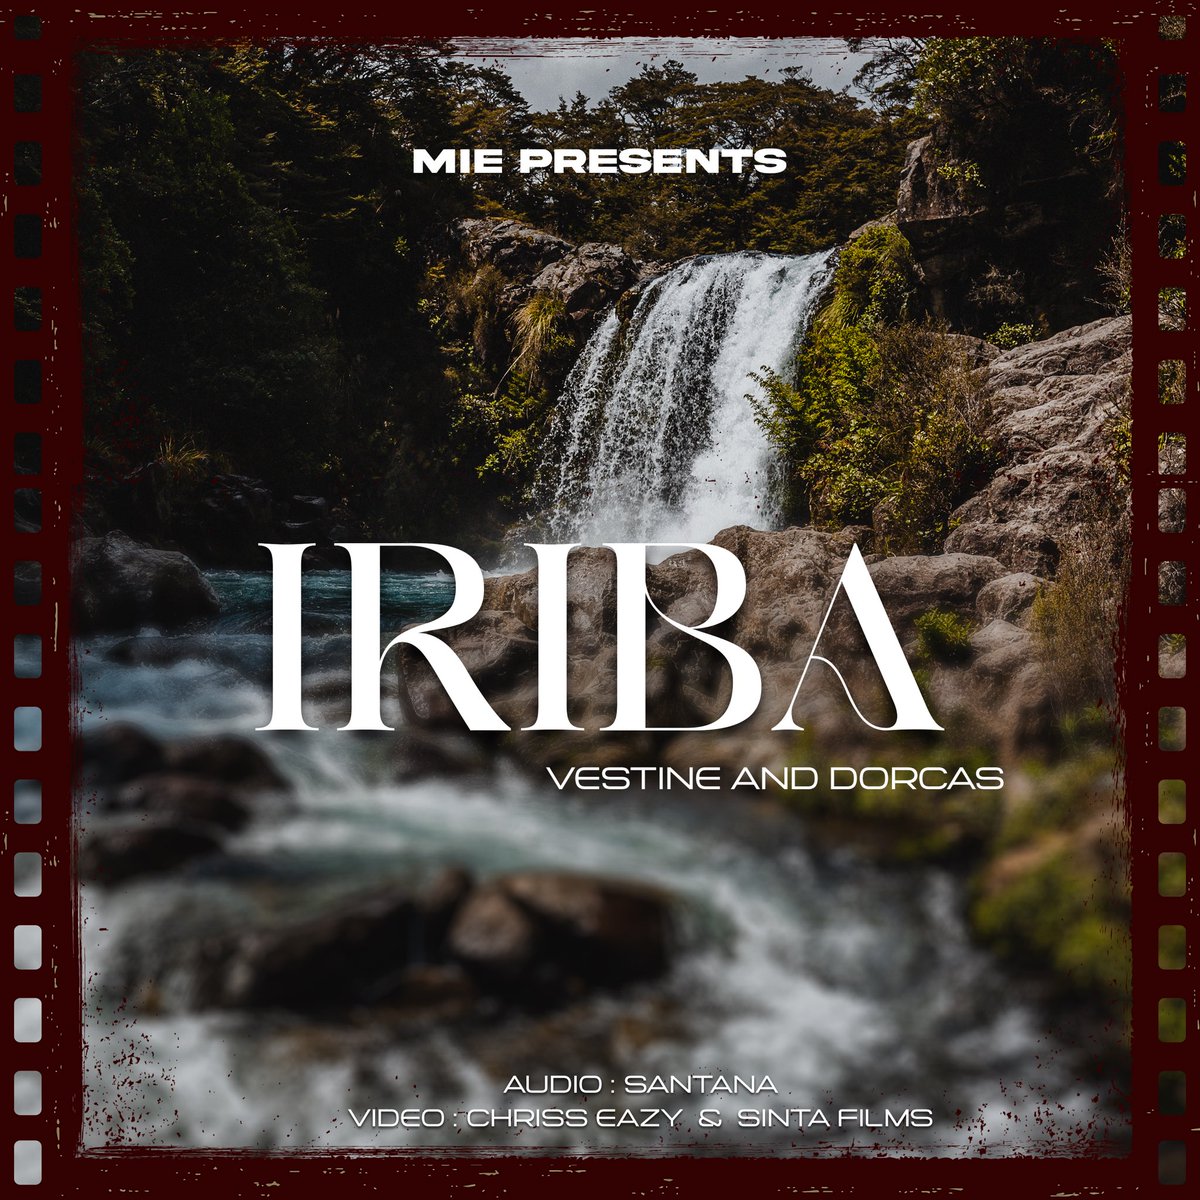 The wait is Almost over … harabura Amasaha macye . let’s praise The almighty Jesus #IRIBA 🎶 @vestineanddorcas_official